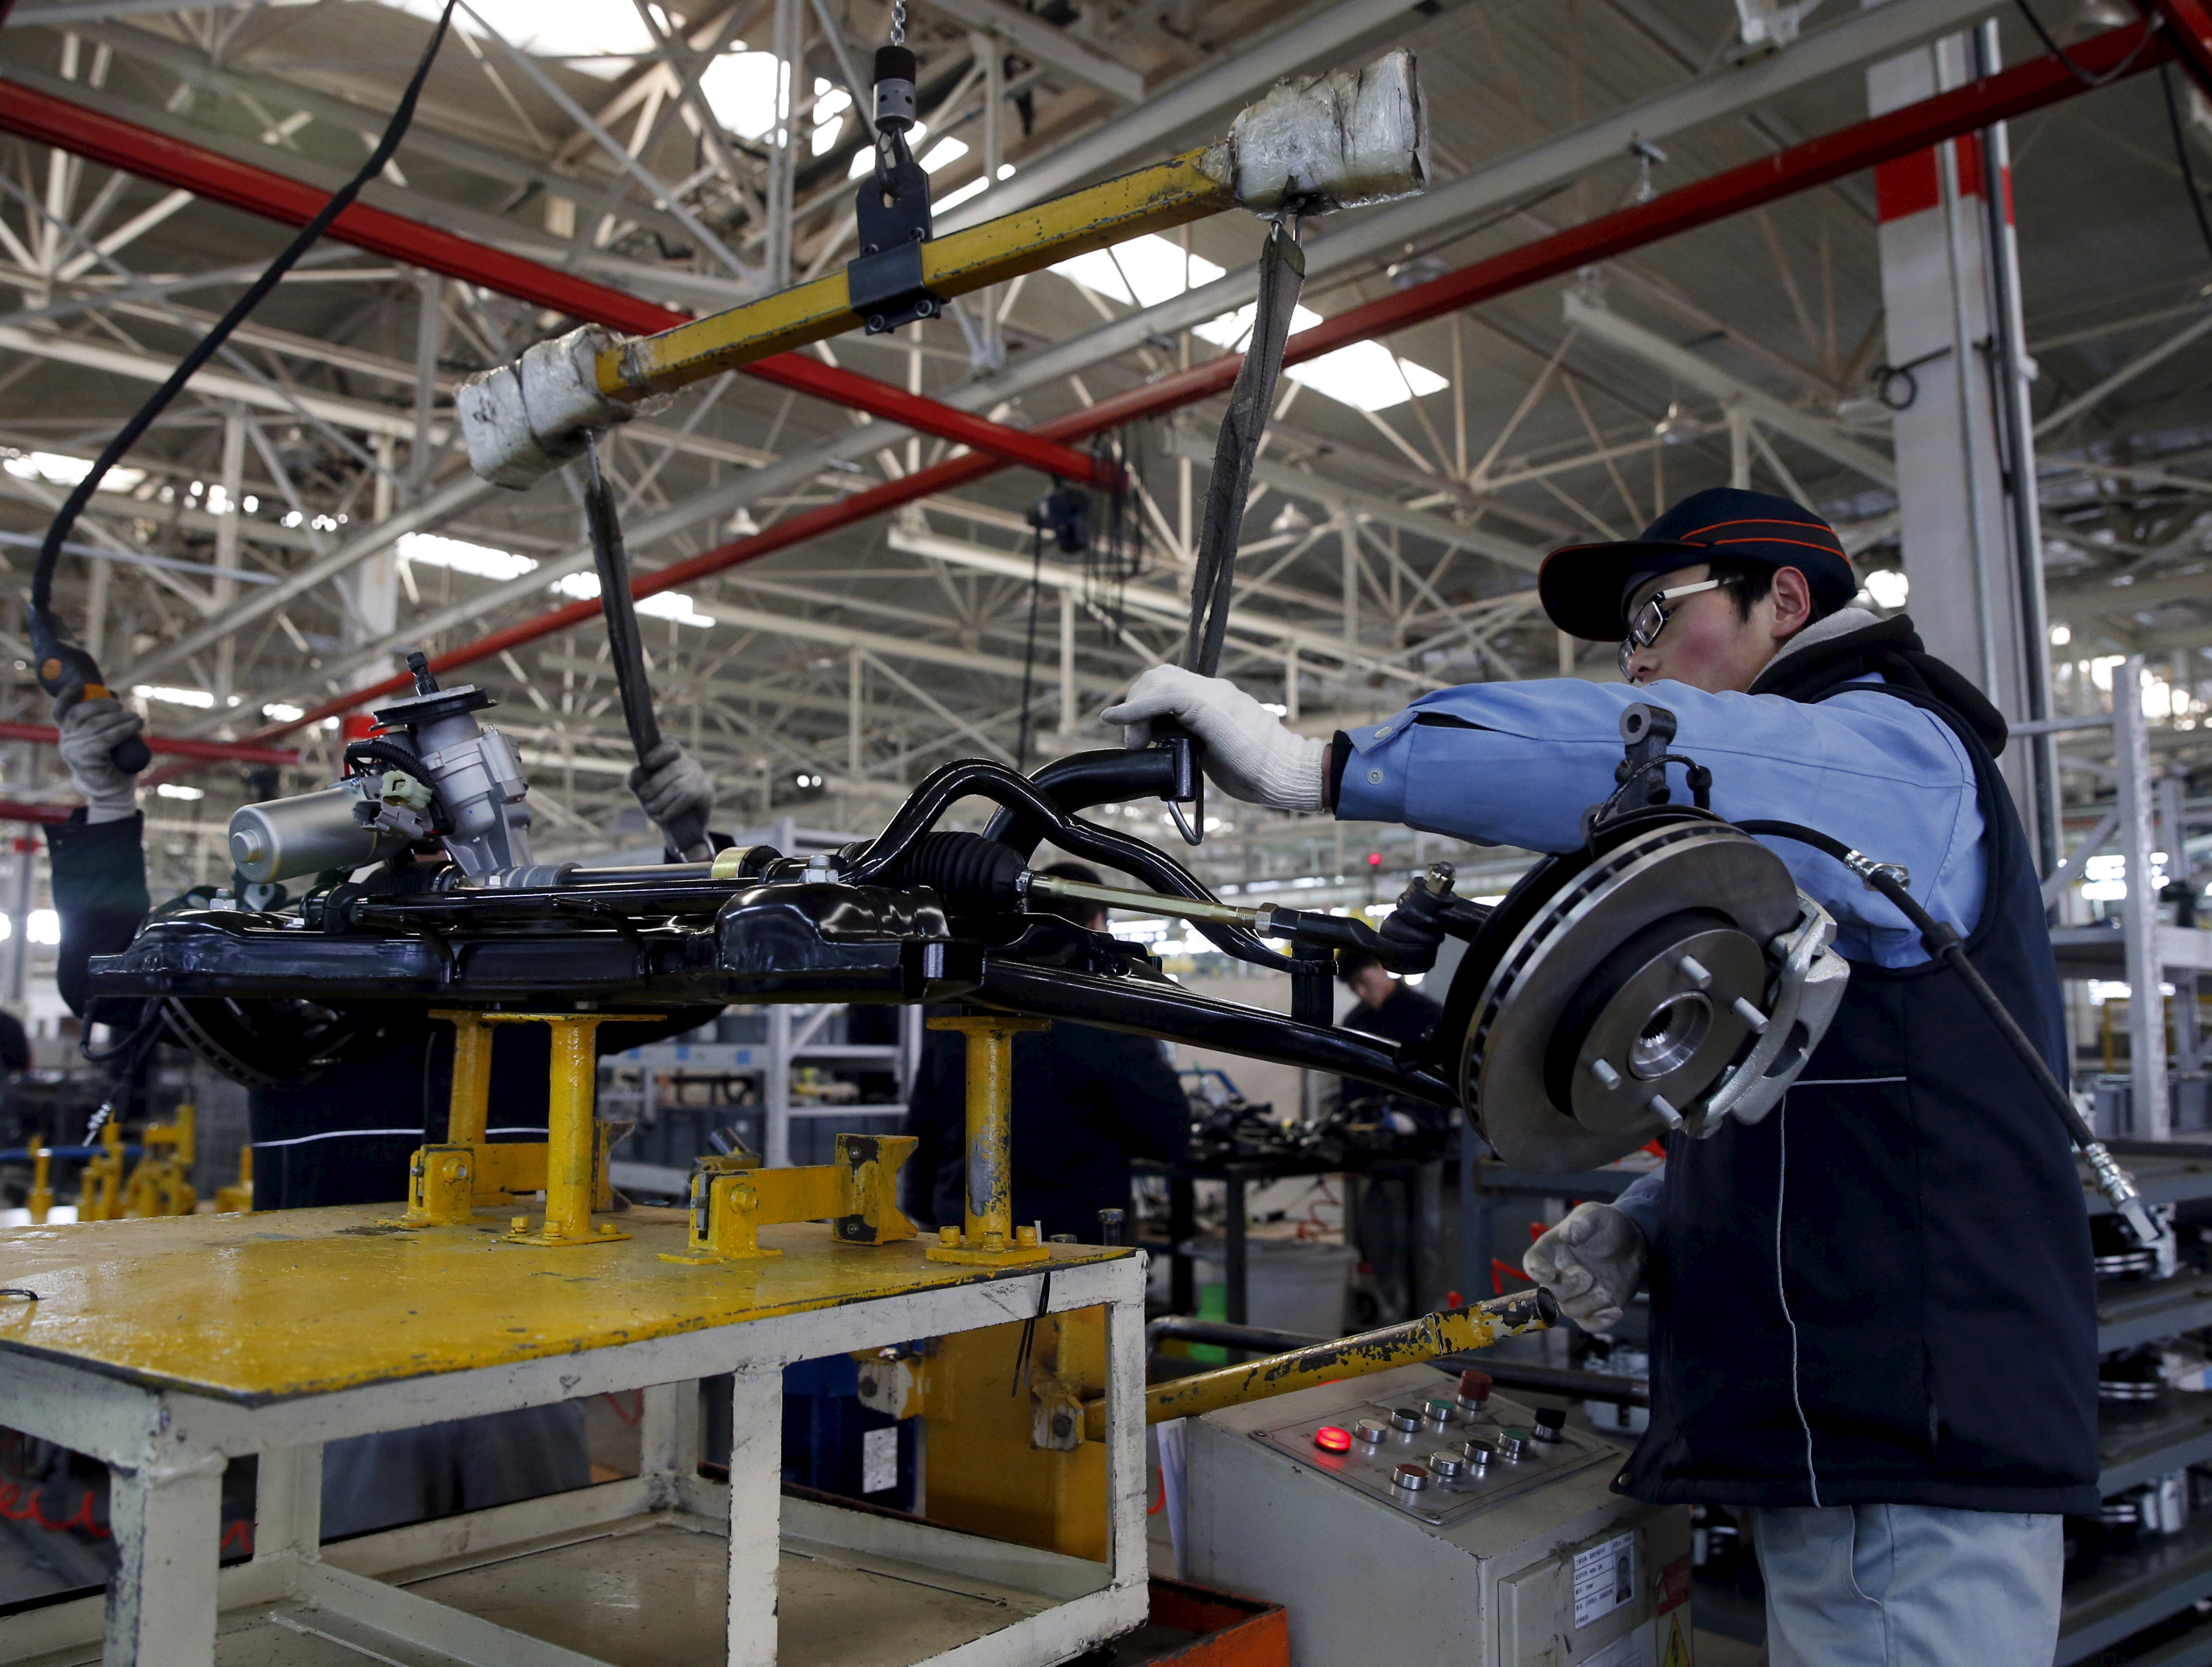 An employee works on an assembly line producing electronic cars at a factory of Beijing Electric Vehicle, funded by BAIC Group, in Beijing, China, Jan. 18, 2016. (Kim Kyung Hoon—Reuters)